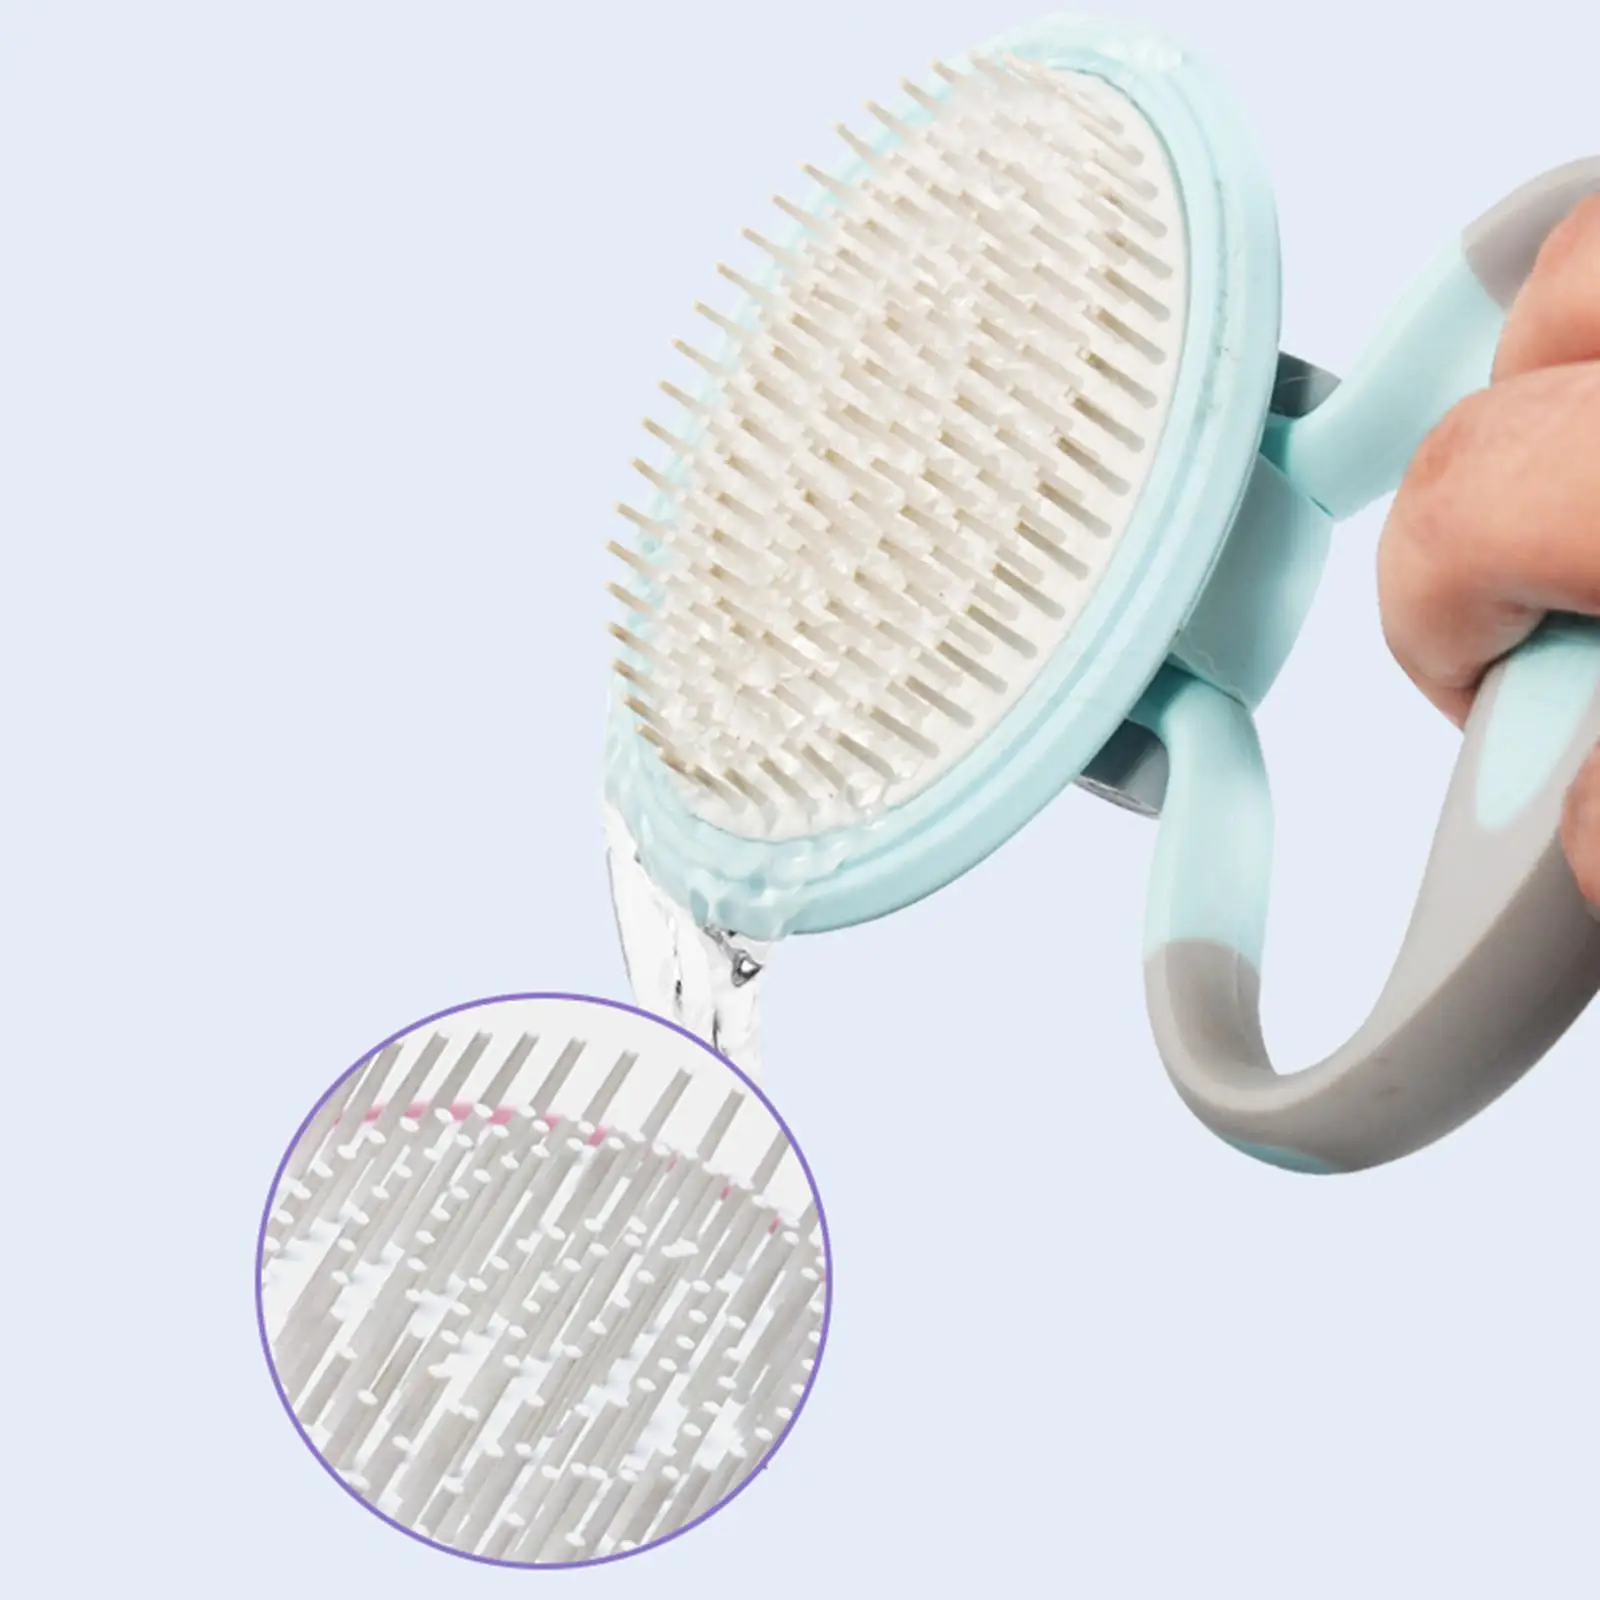 Cat Brush Grooming with Adjustable Handle Shedding Comb Removes Loose Underlayers for Tangled Hair Short or Long Hair Washing